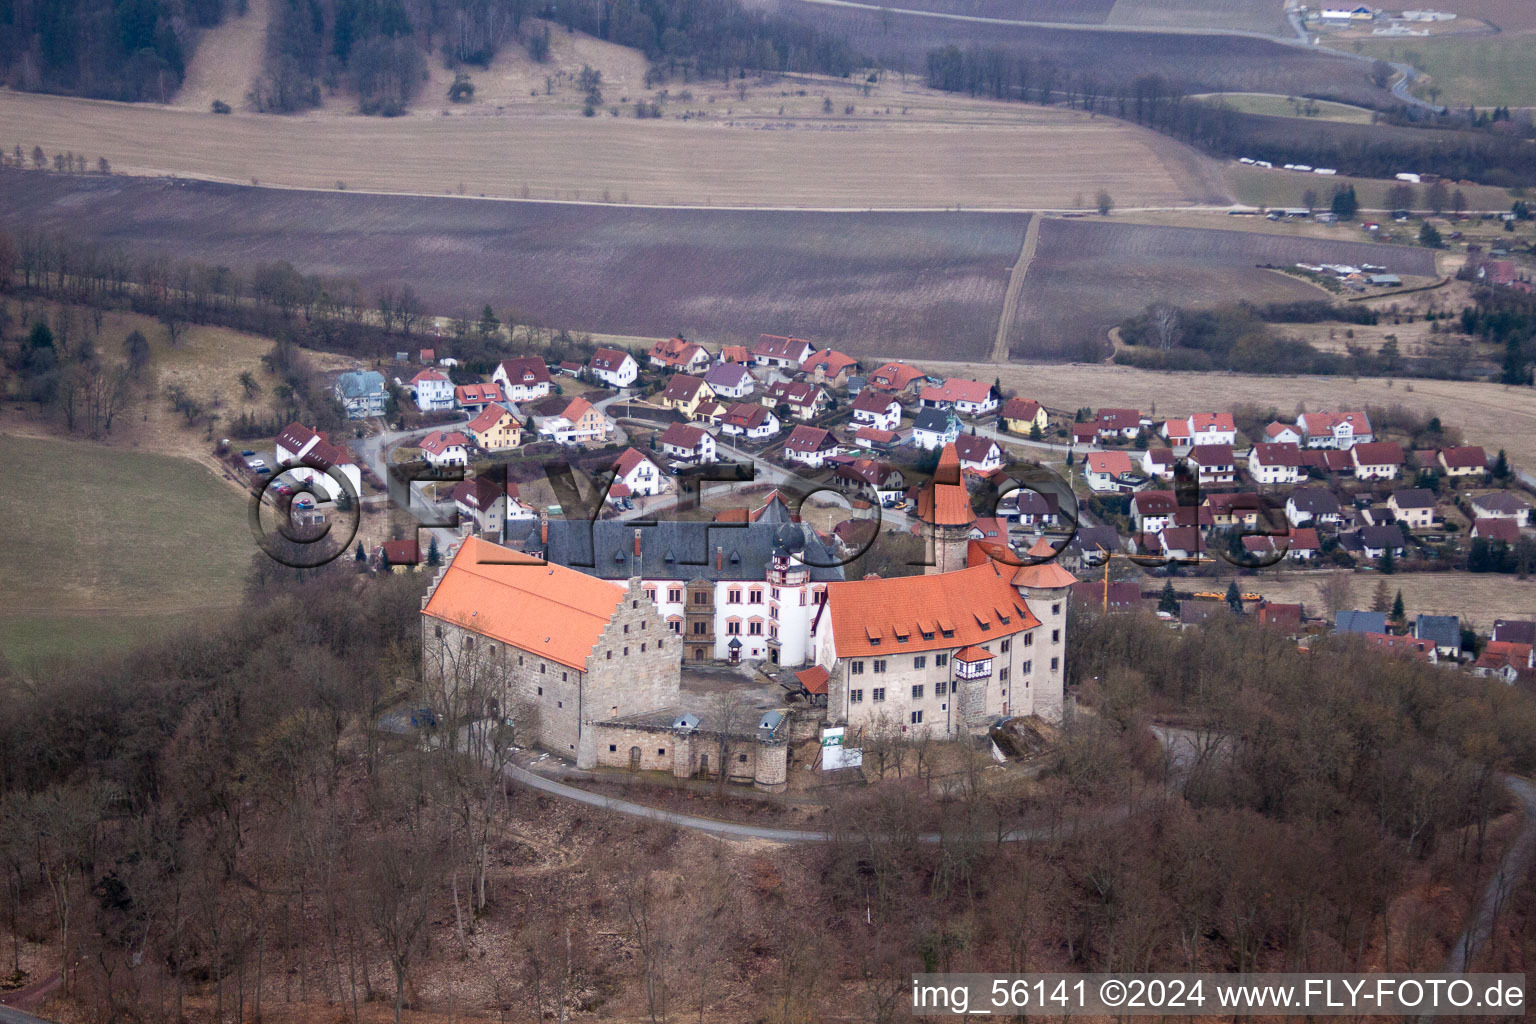 Castle of the fortress Veste Heldburg in the district Heldburg in Bad Colberg-Heldburg in the state Thuringia